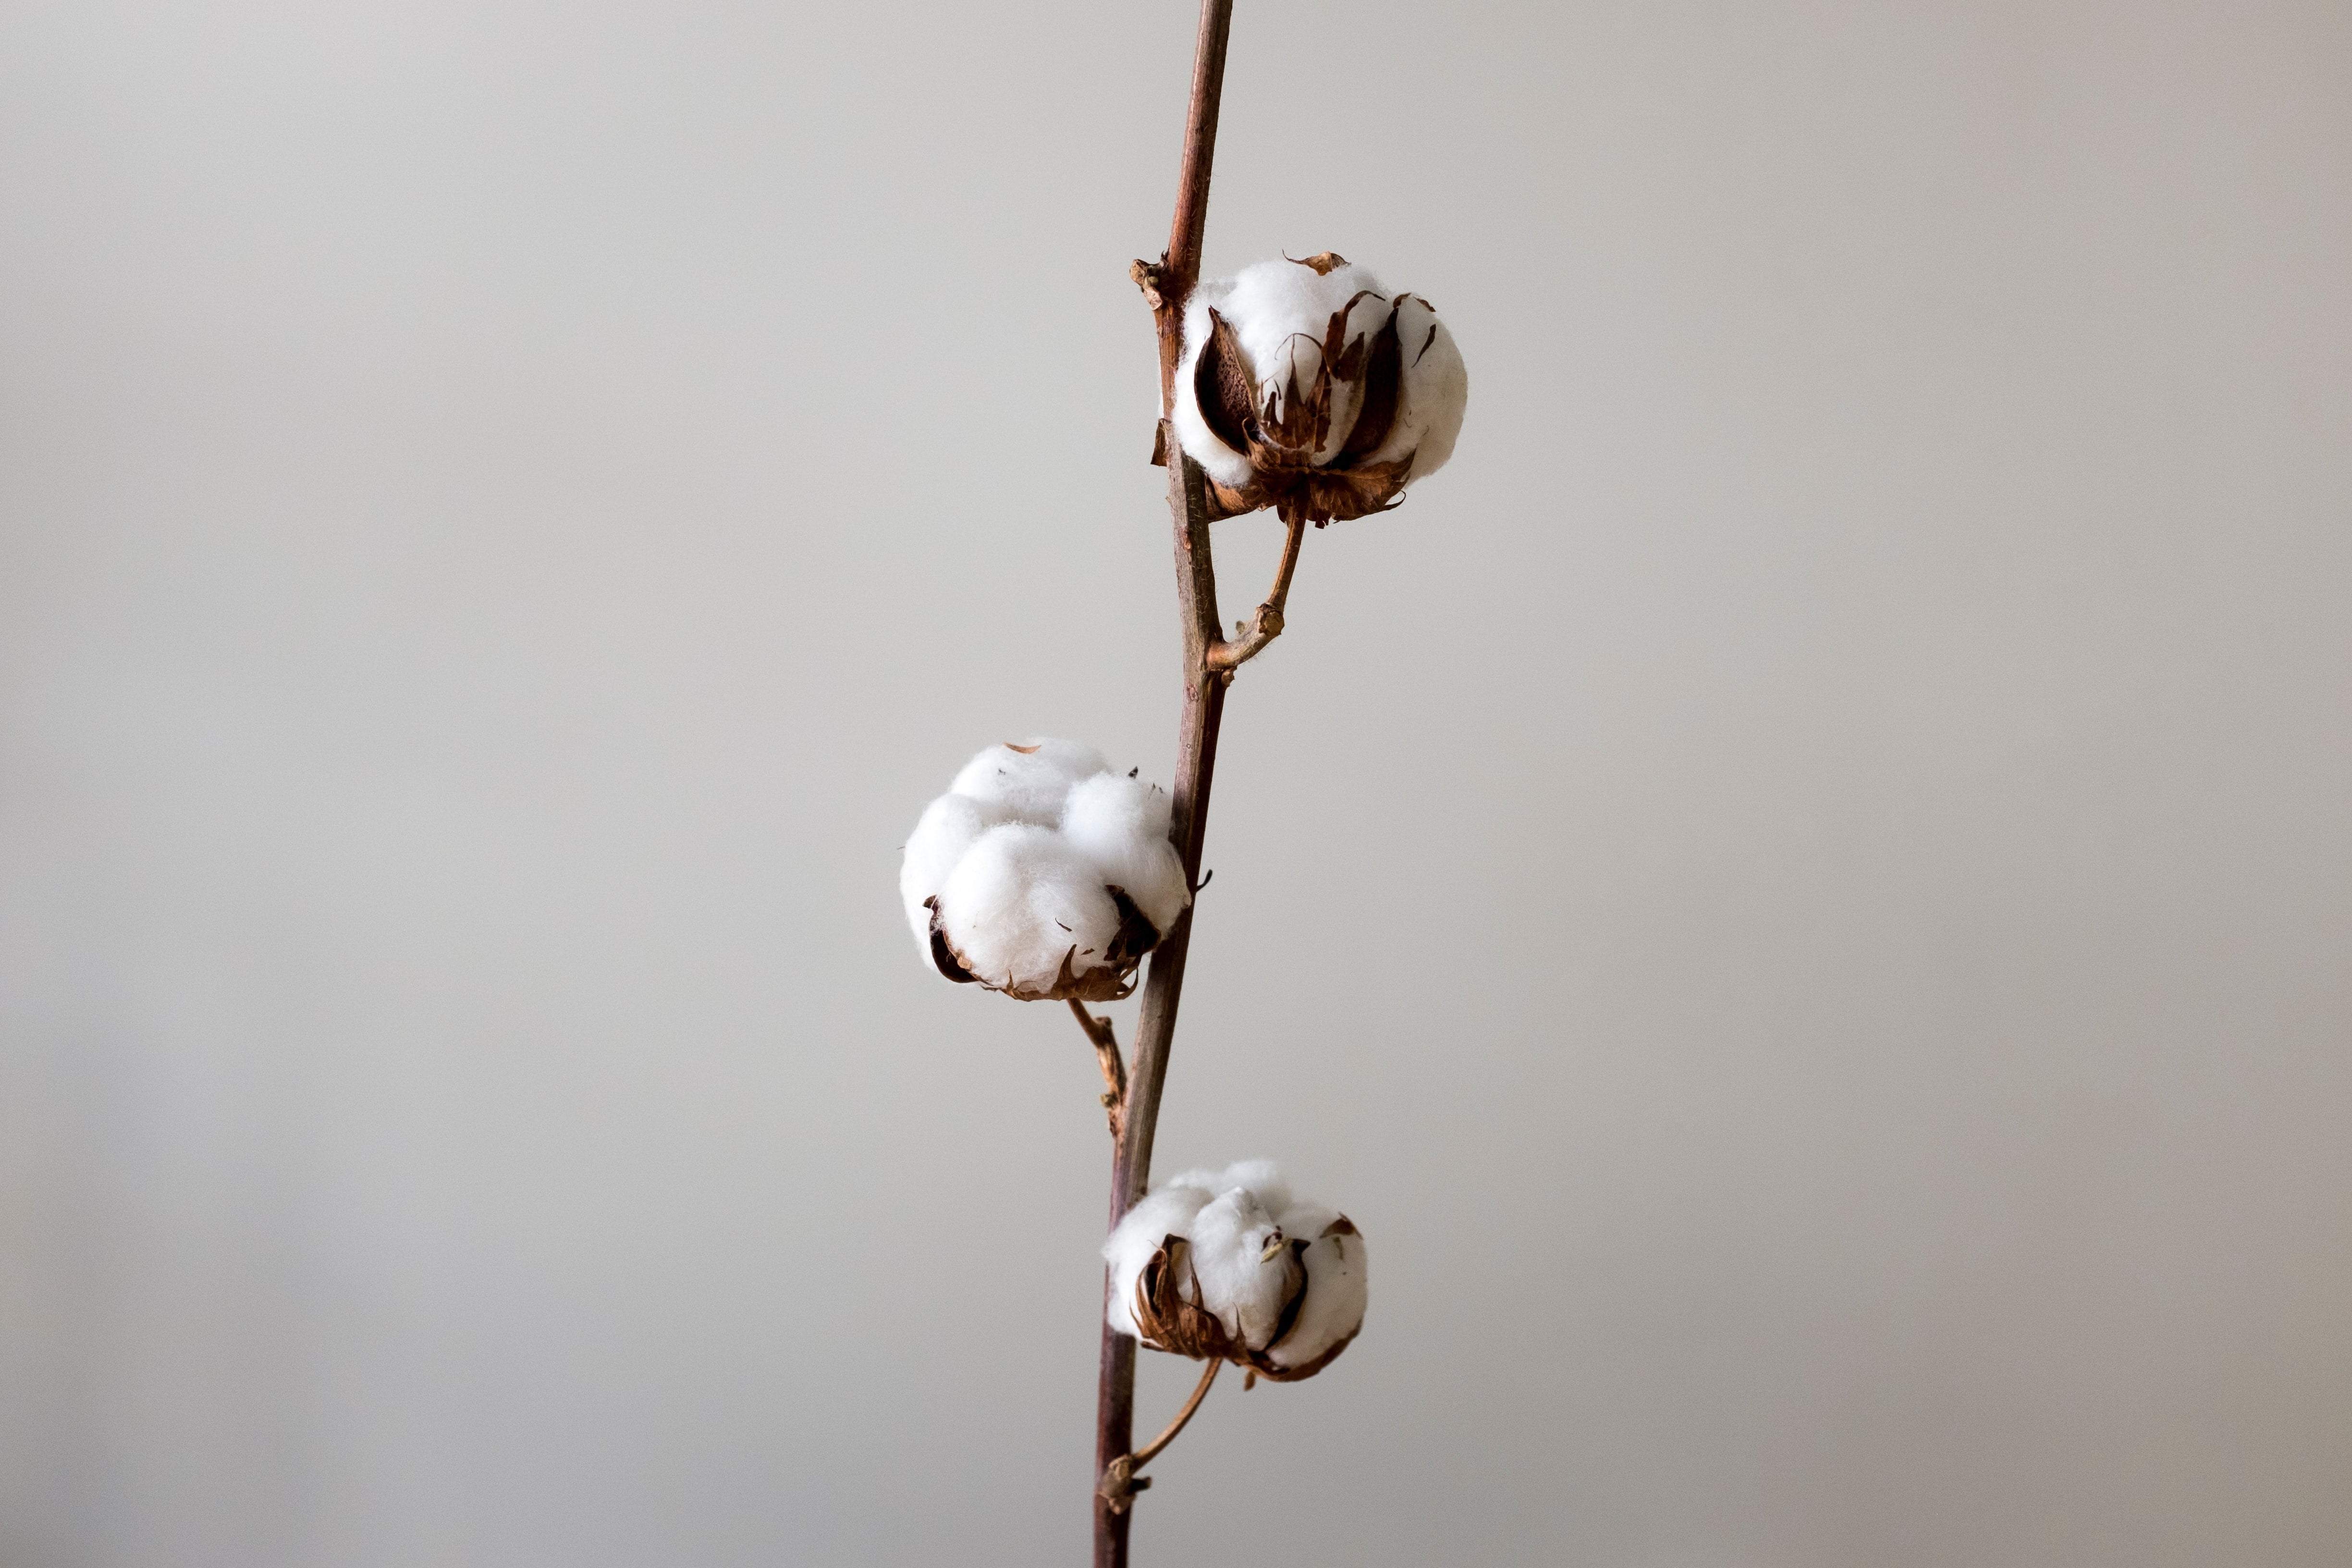 Bamboo or Cotton - What is better for the babies?